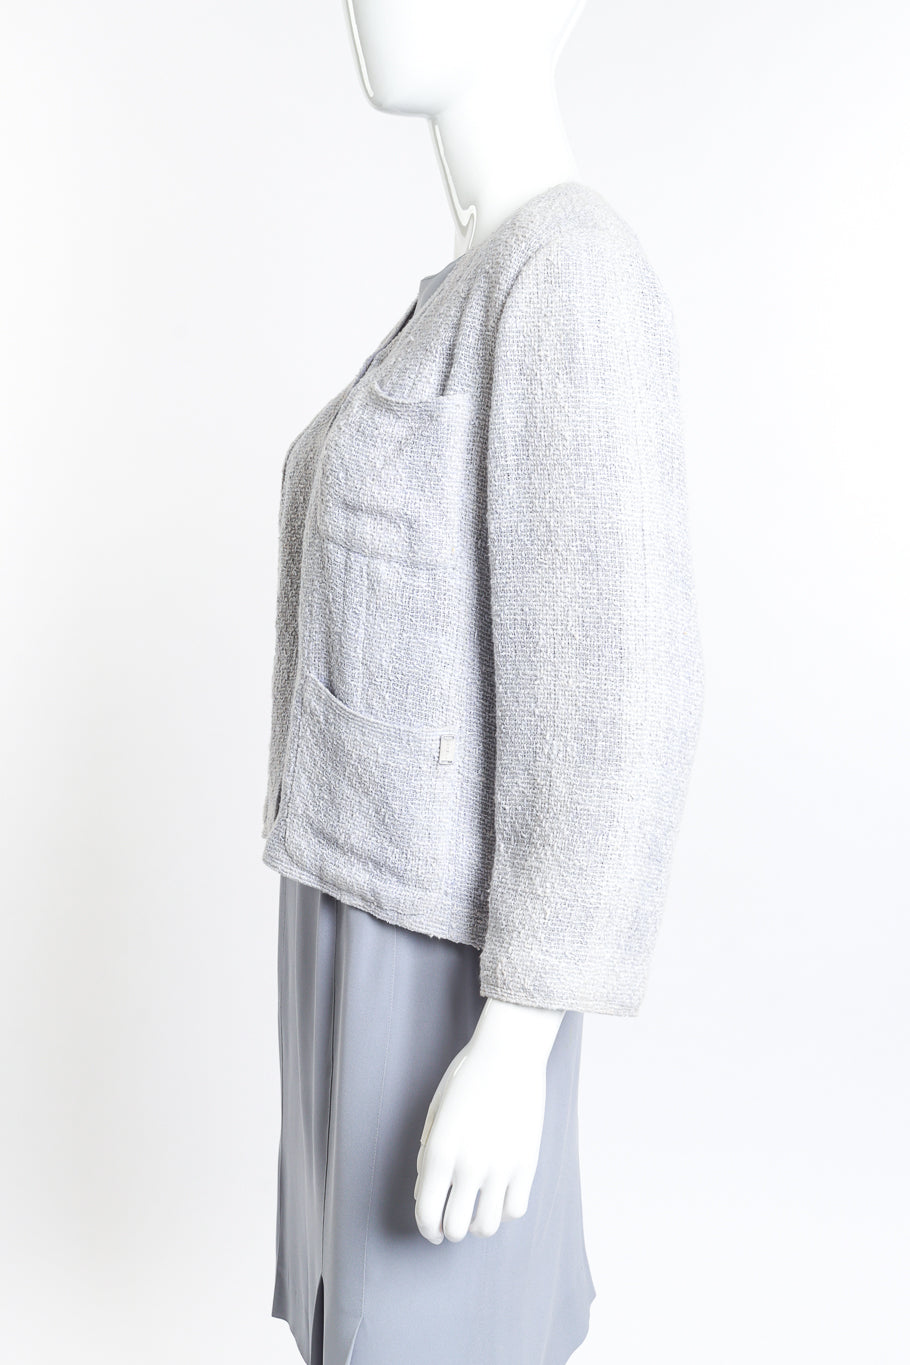 Chanel Boucle Jacket Three Piece Set side view on mannequin @RECESS LA